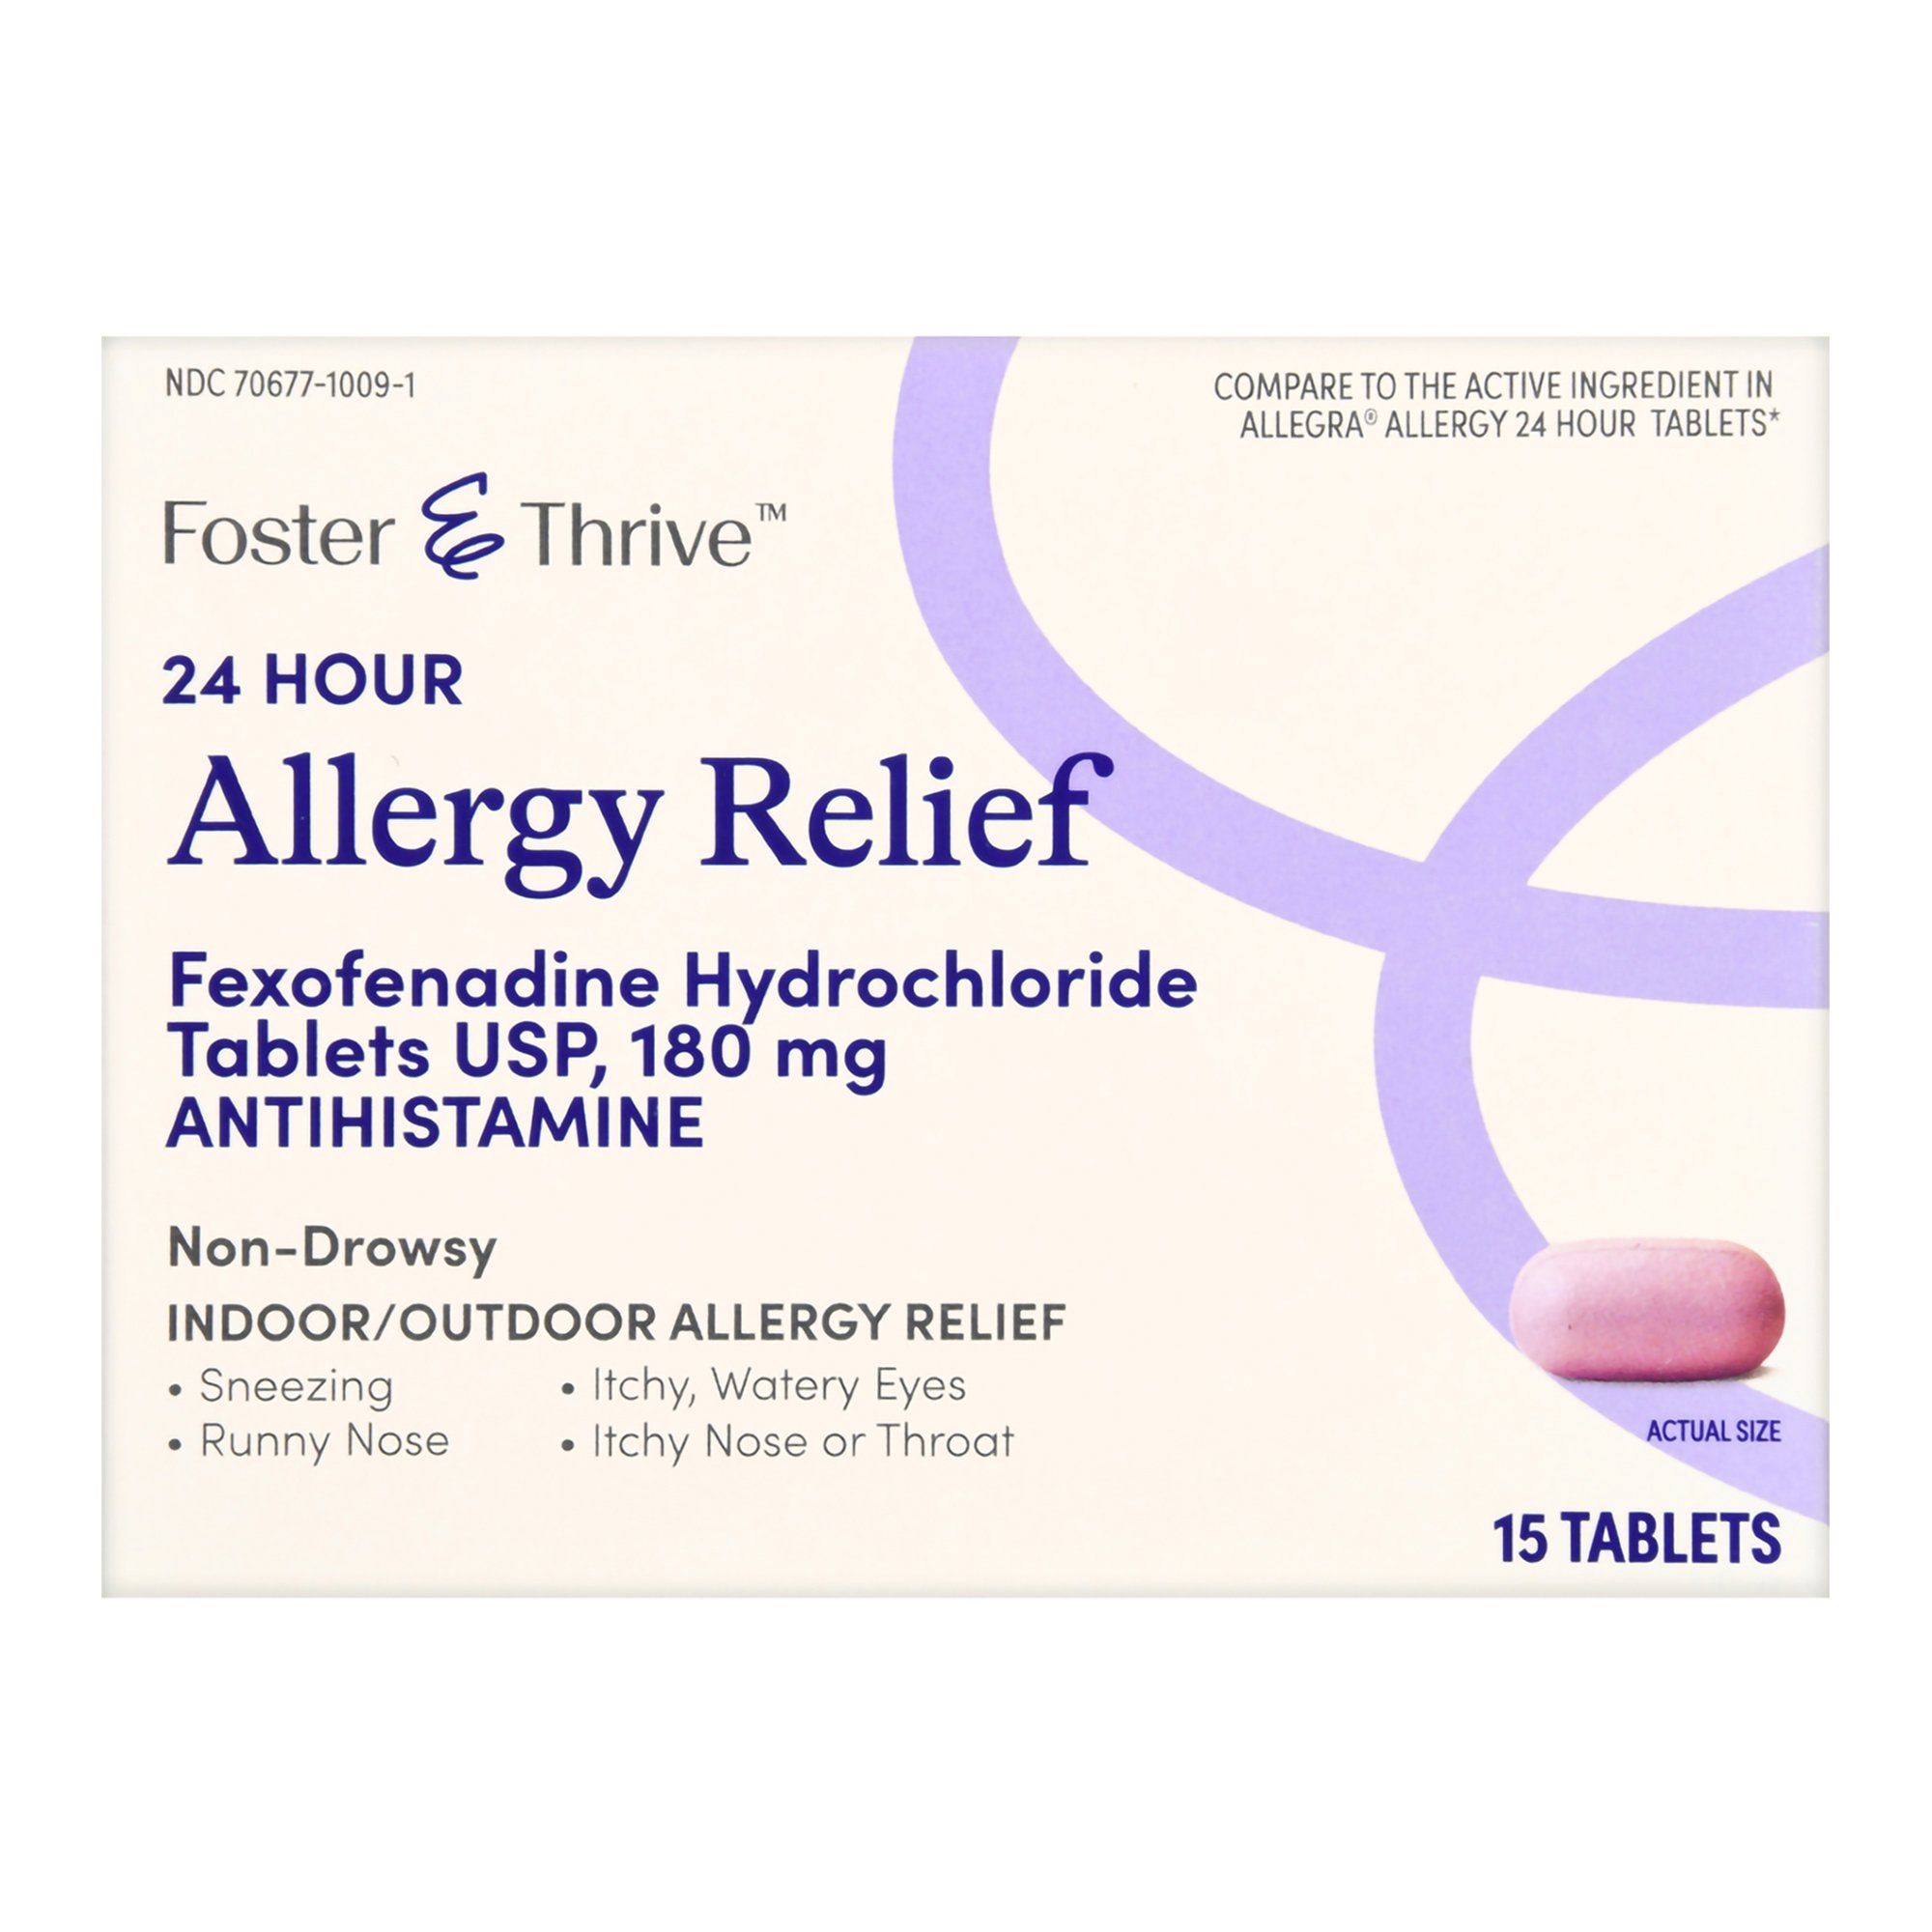 Foster & Thrive 24 Hour Allergy Relief Fexofenadine HCl USP Tablets, 180 mg - 15 ct